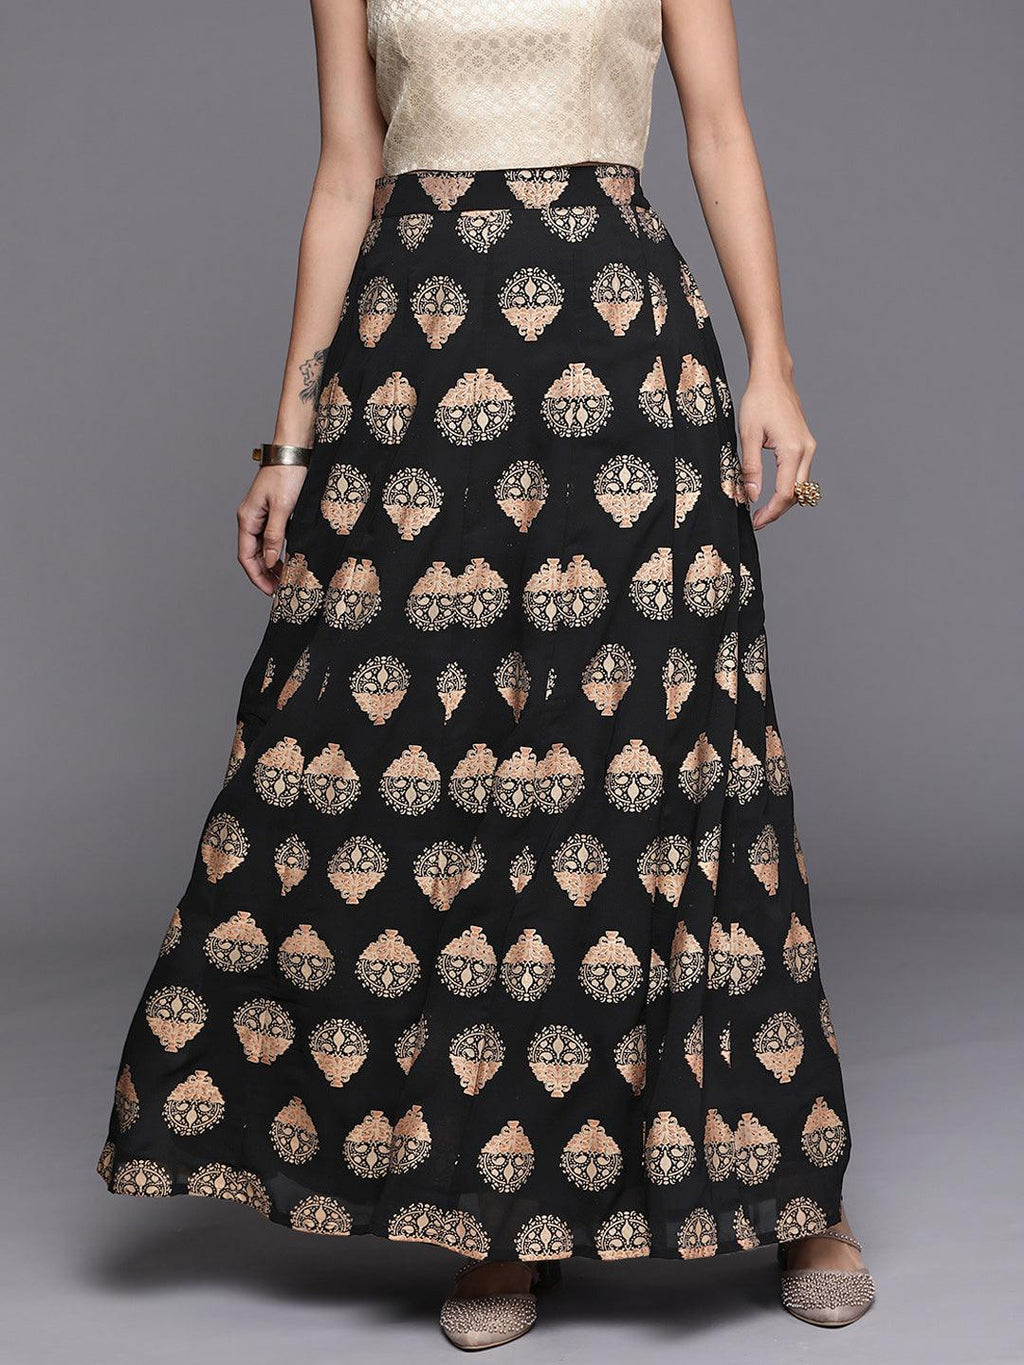 Details more than 134 georgette long skirt latest